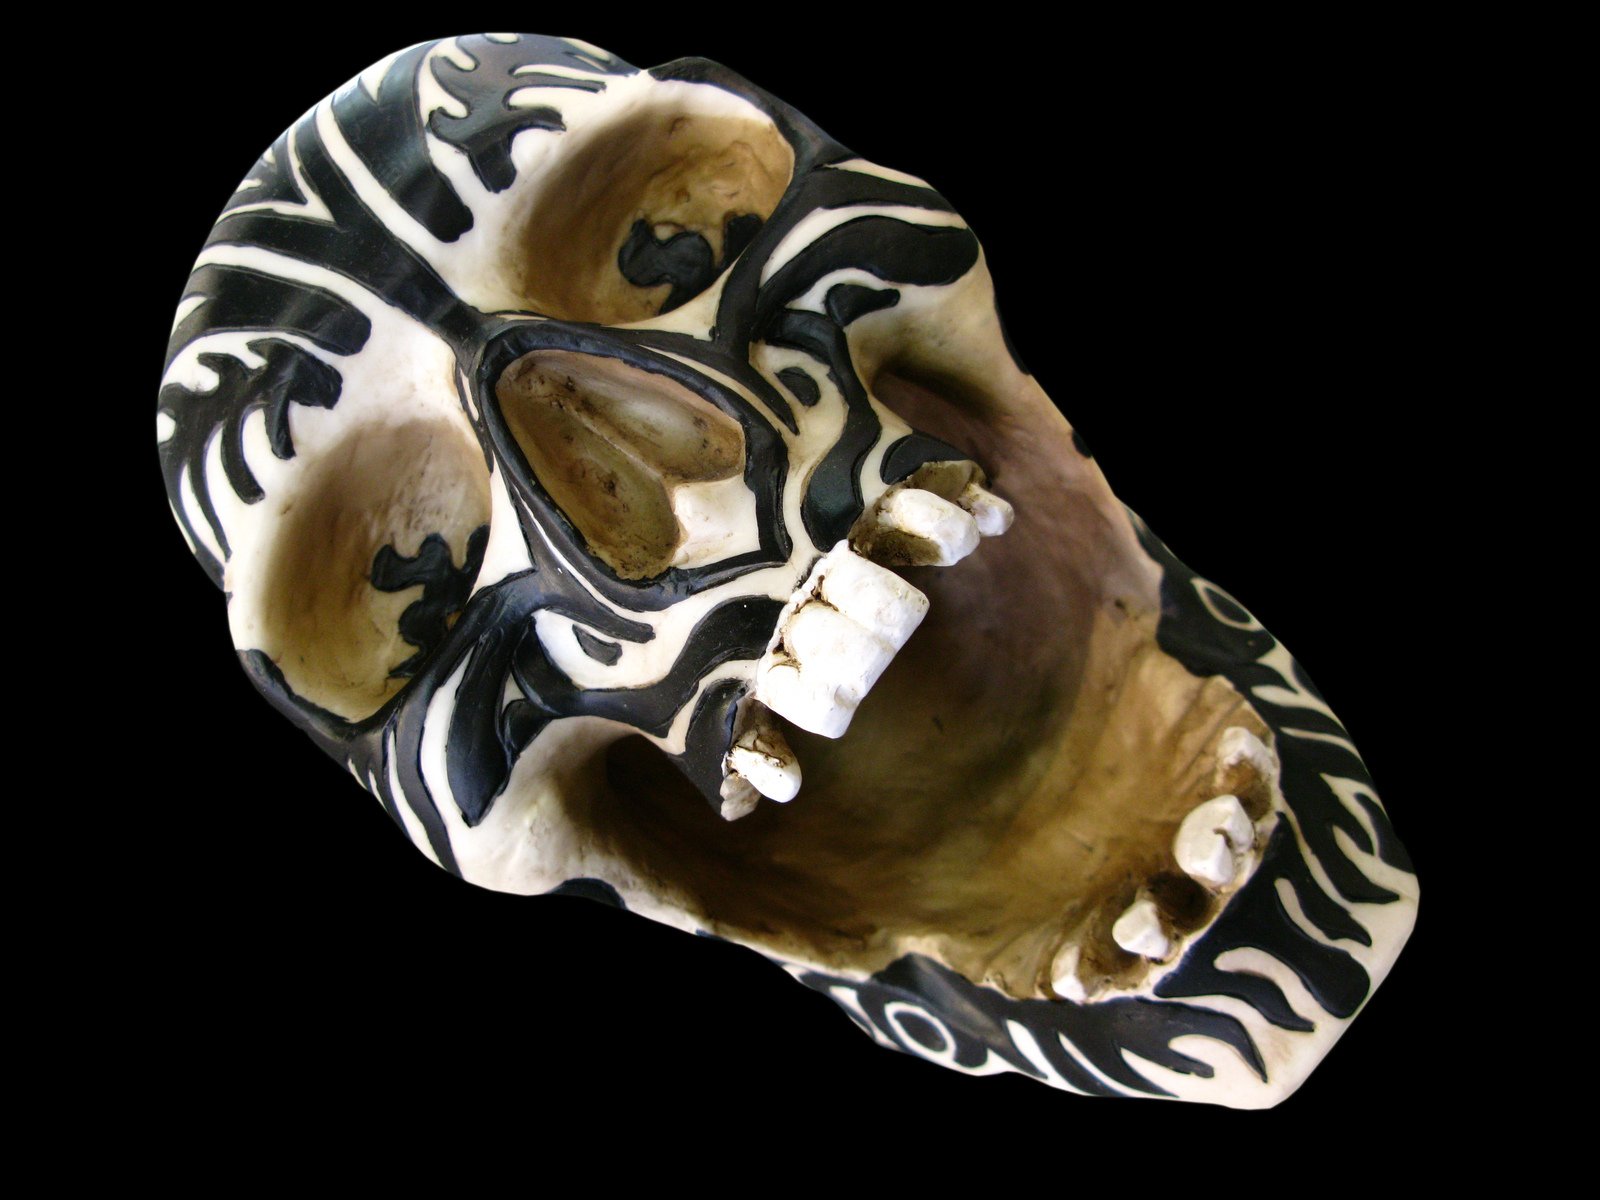 a mask with an unusual design and ornate decorations